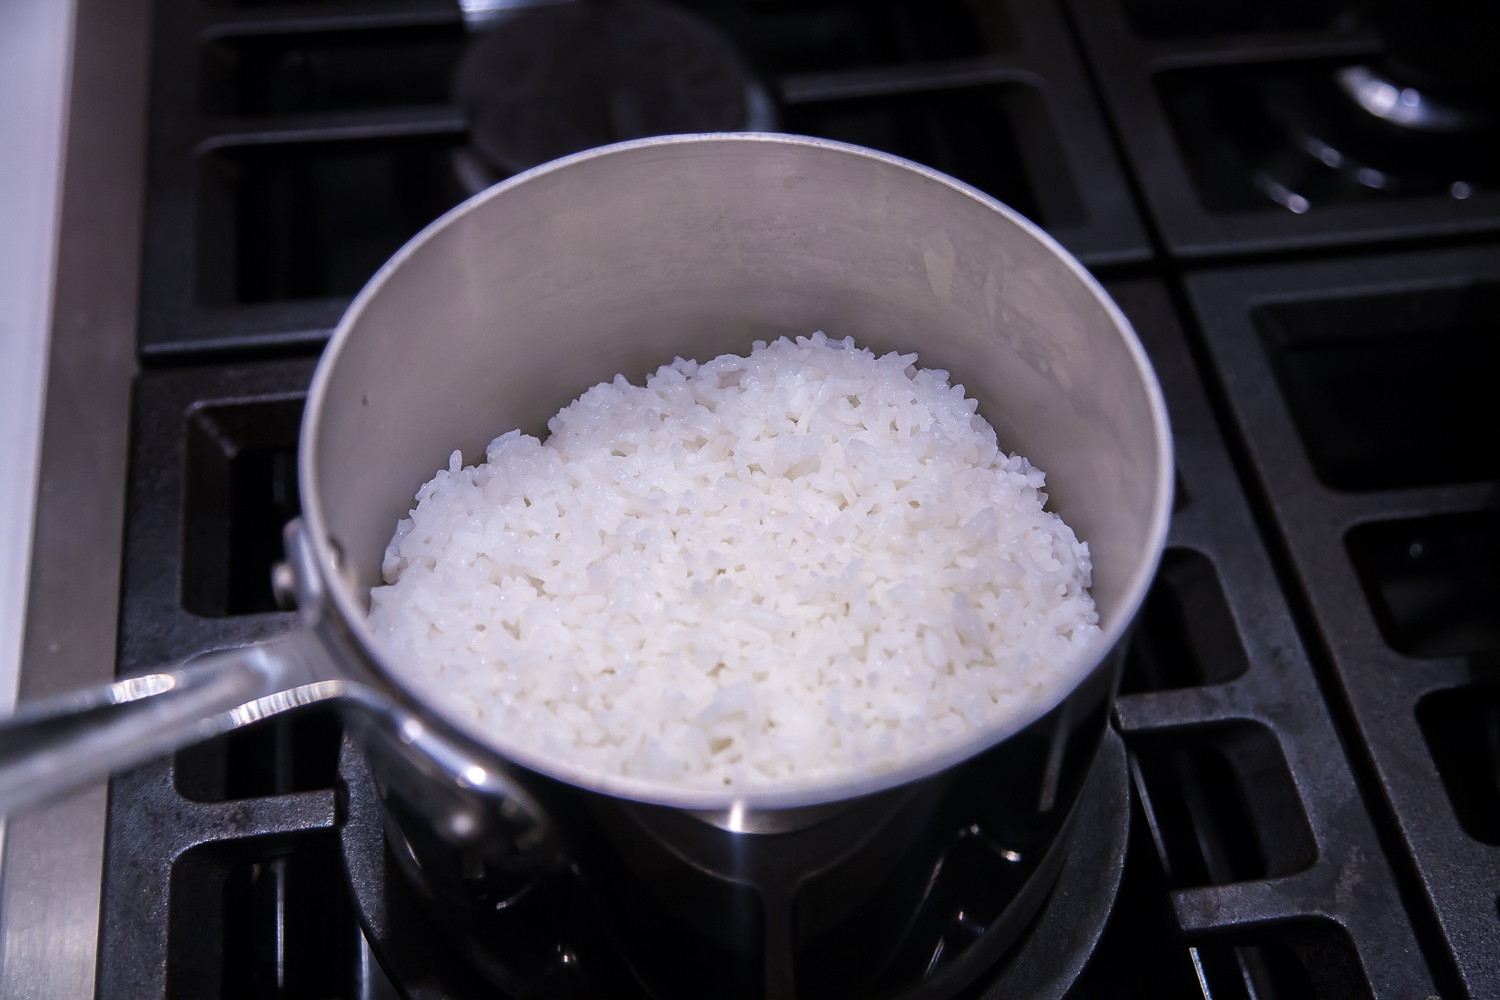 https://www.asiancookingmom.com/wp-content/uploads/2021/05/How-to-Cook-Rice-with-a-Pot-9-of-13.jpg